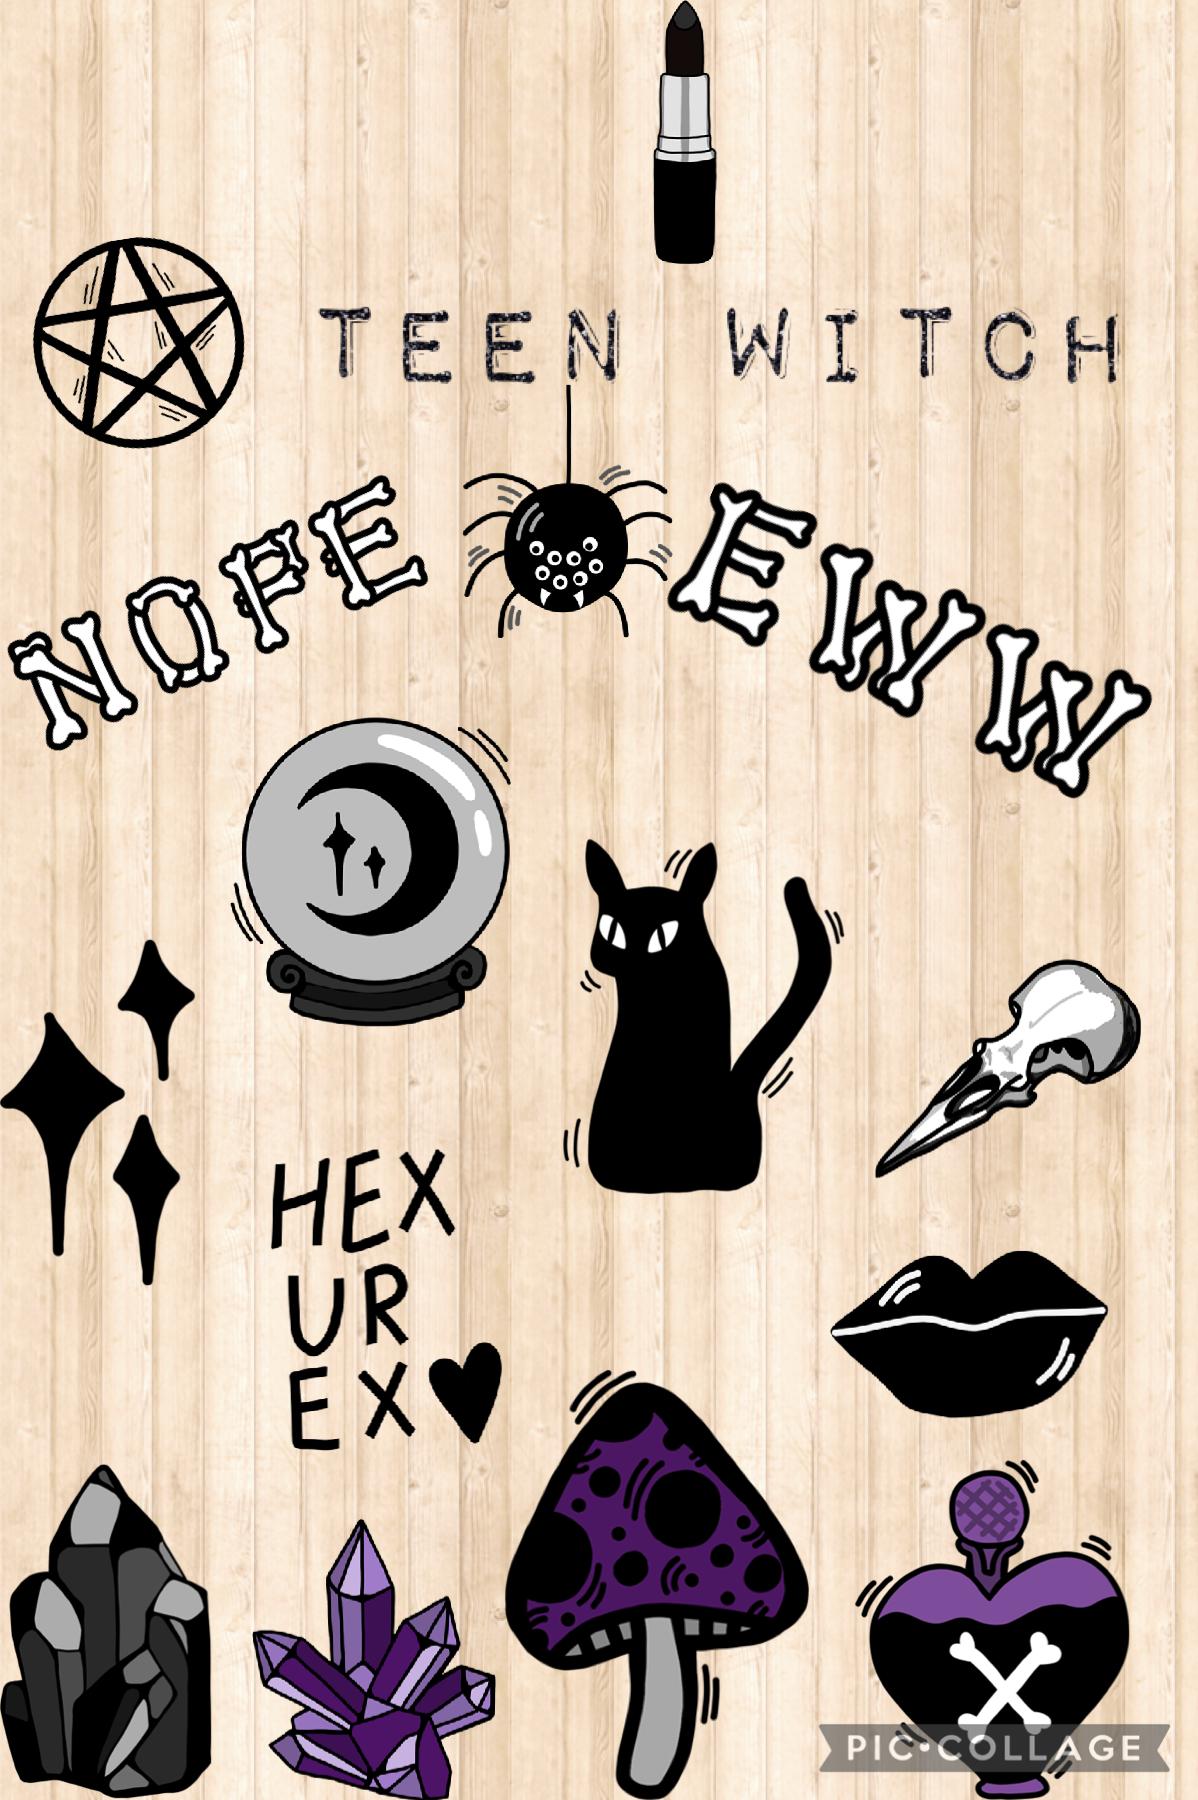 Teen witch 